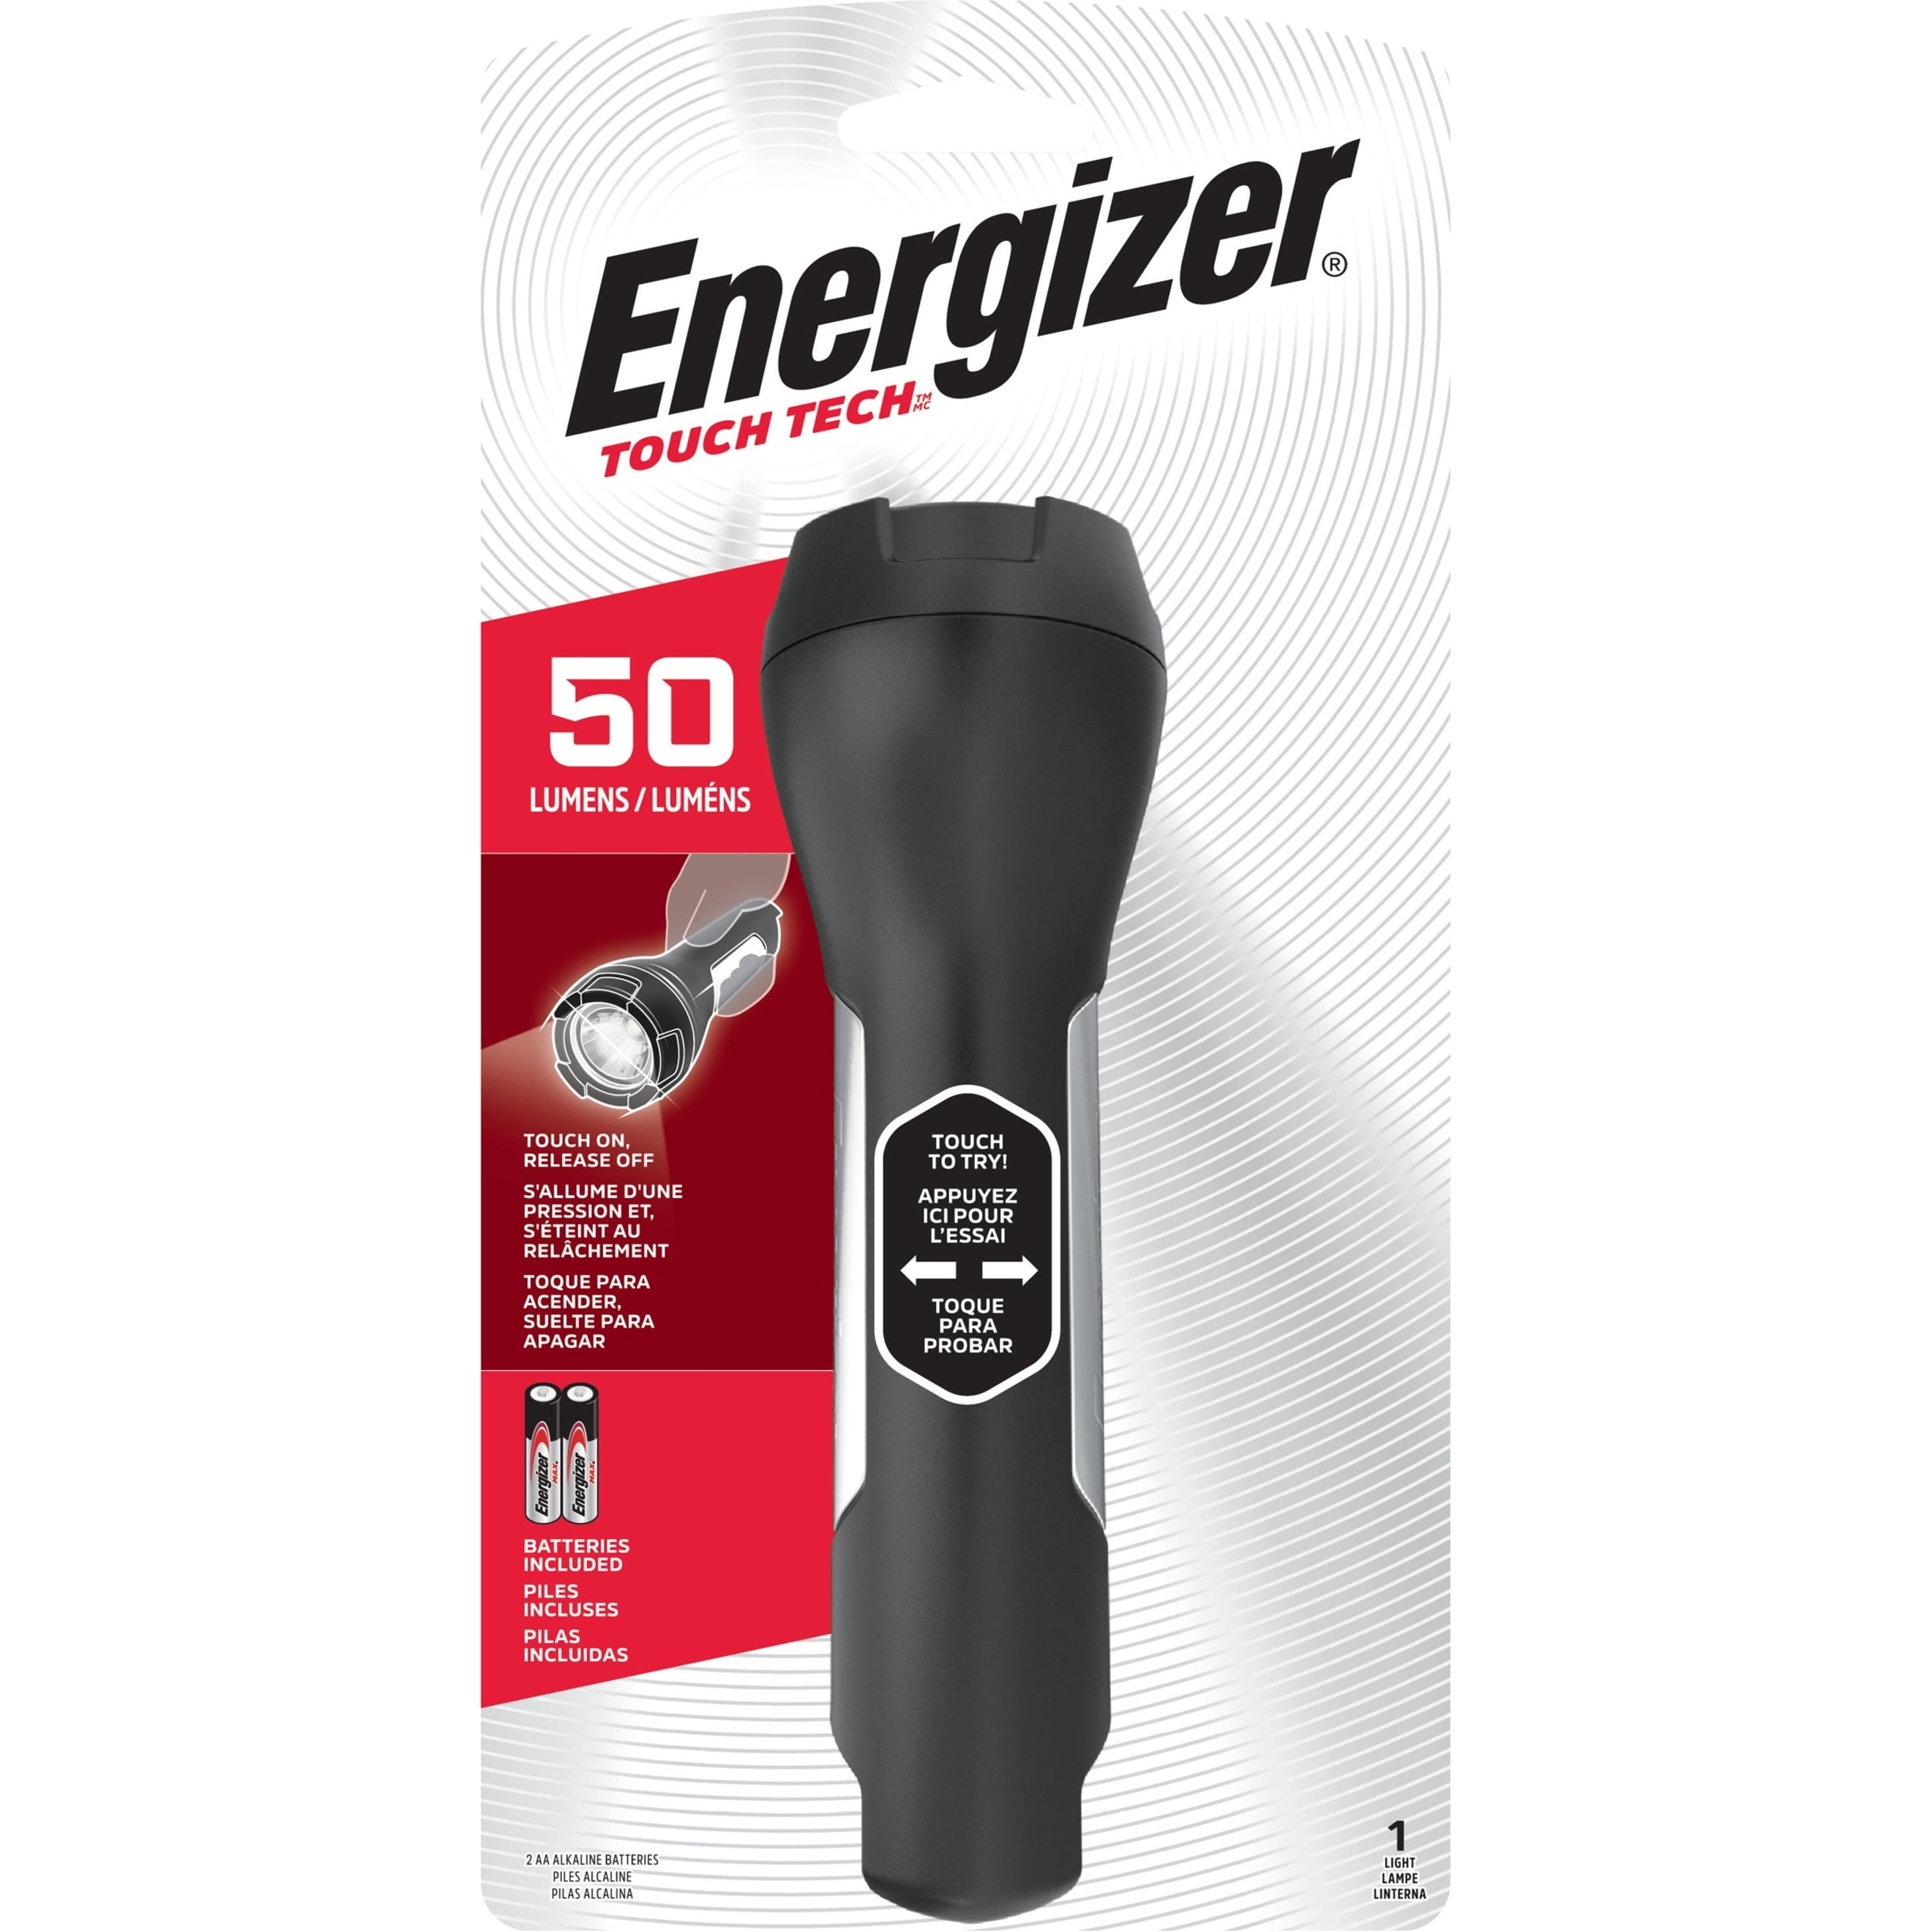 Energizer Touch Tech Switchless Bright LED Flashlight Touch ON/OFF w/Batteries 